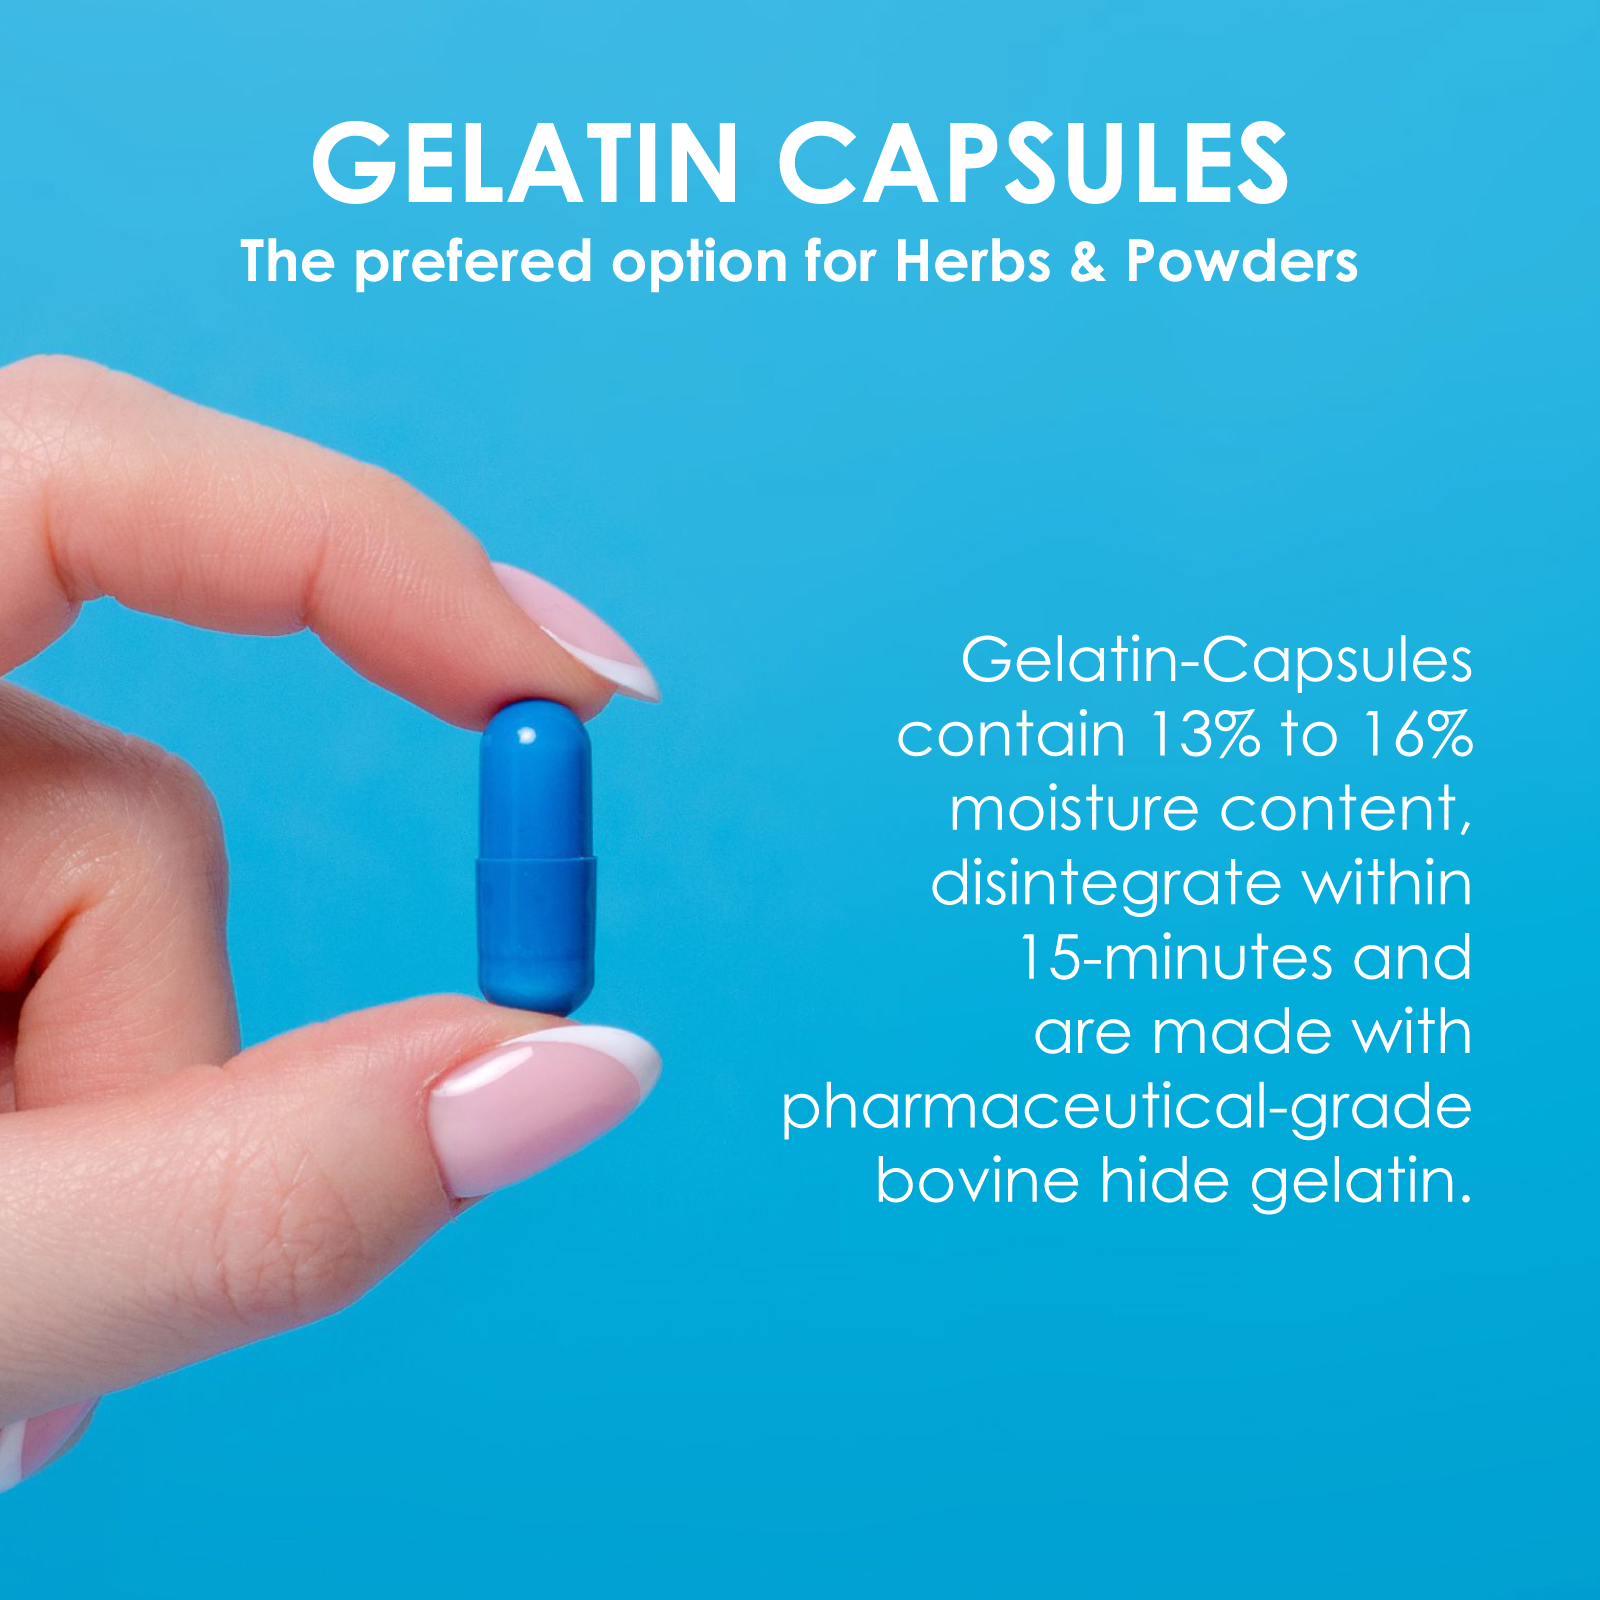 Clear Size 000 Empty Gelatin Capsules by Capsuline - 50 Count - 50 count - 50